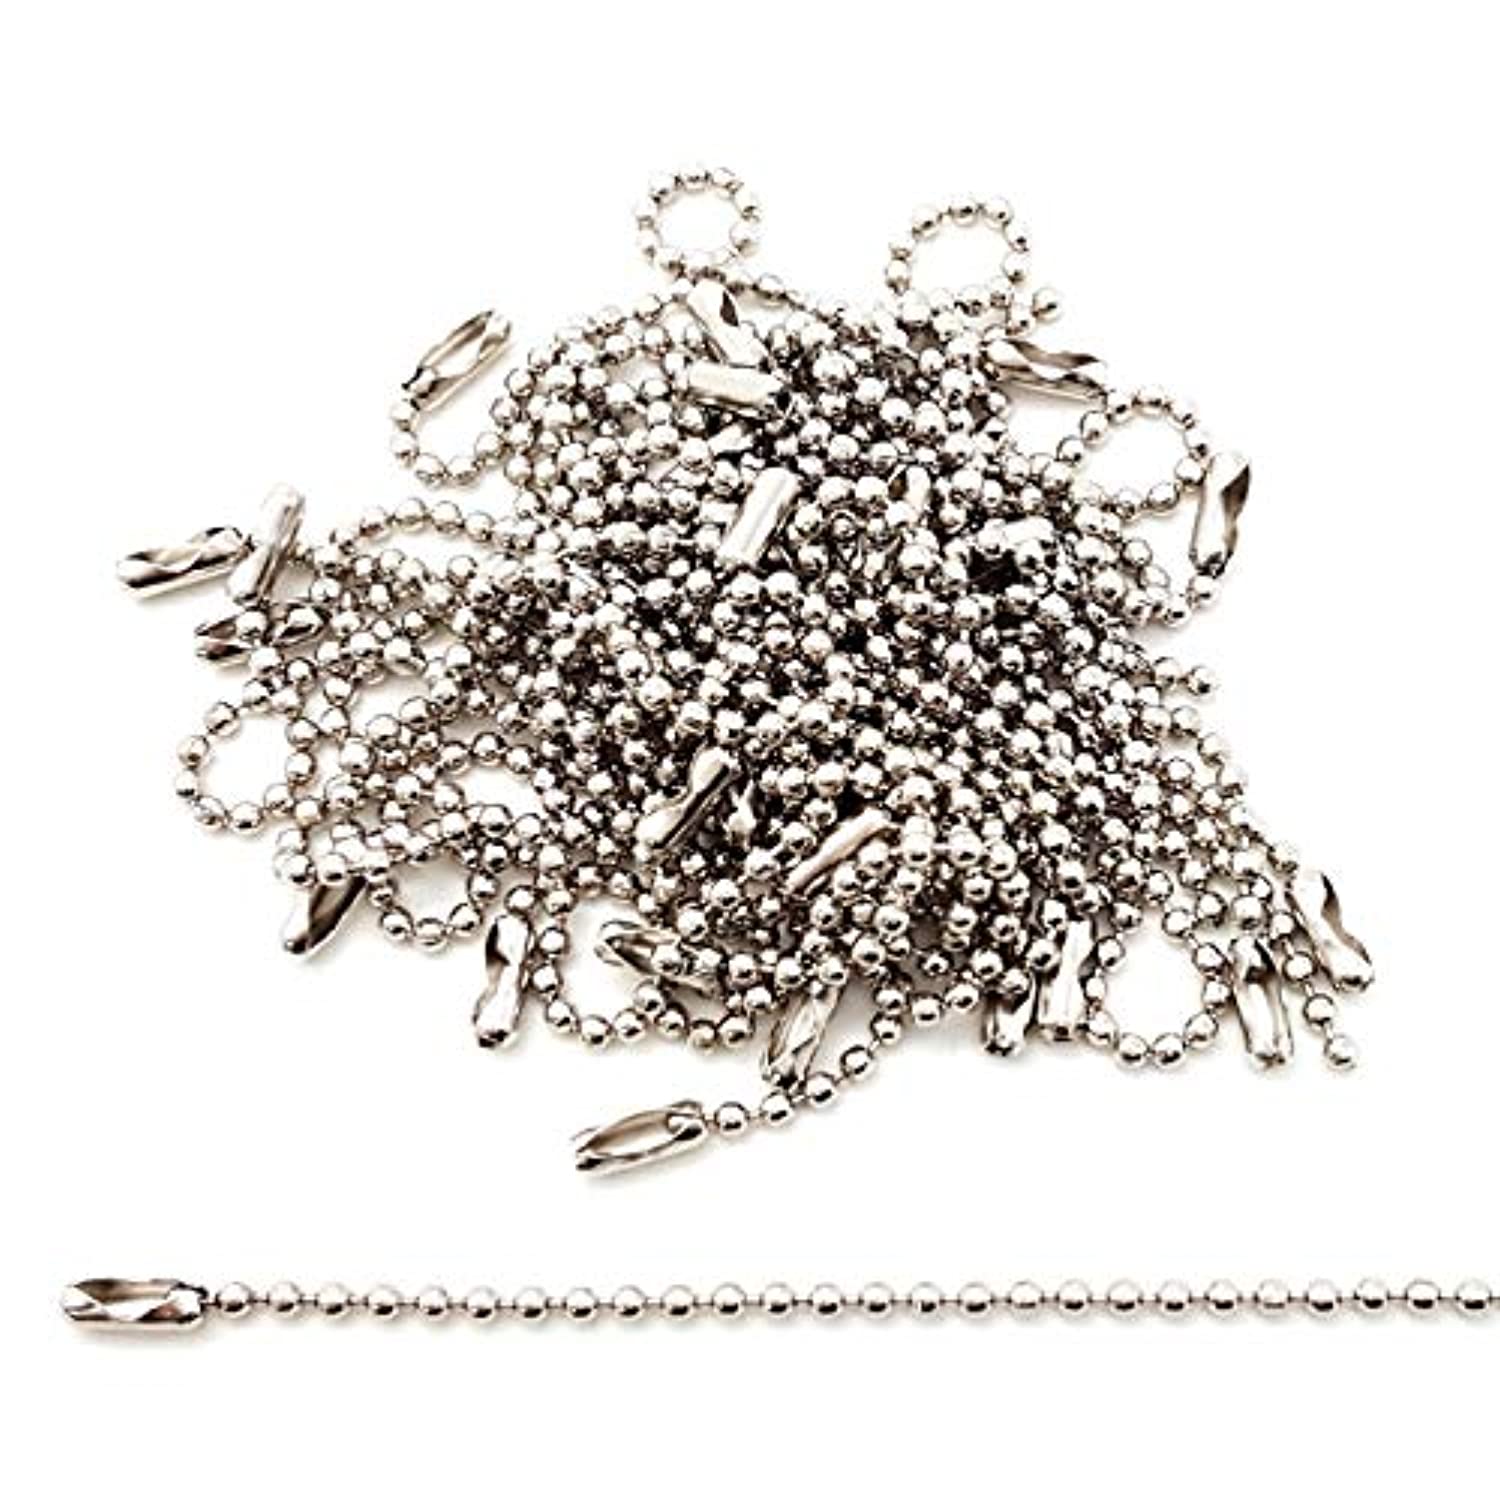 Ball Chain Manufacturing #3 Stainless Steel Key Chains - 4.5 inch Length